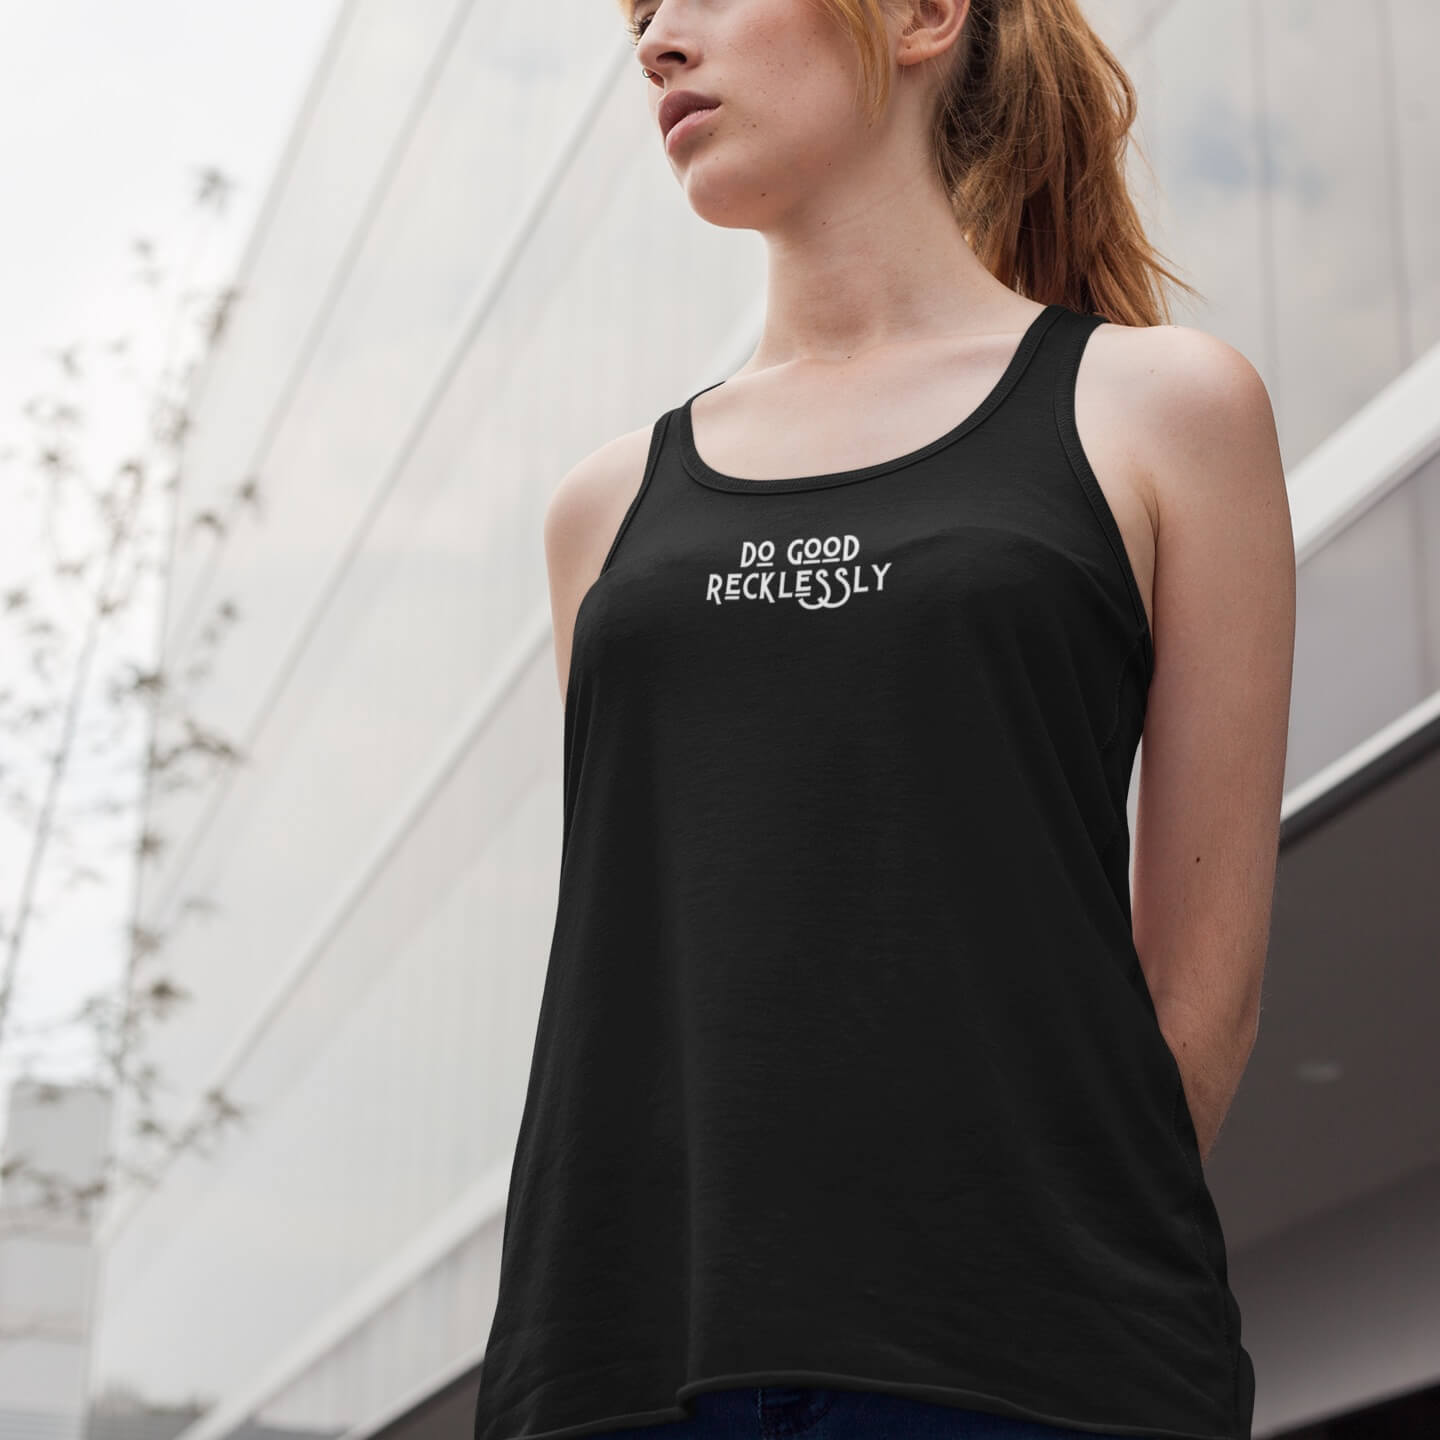 woman with strawberry blonde hair stands outside a building wearing a black do good recklessly relaxed racerback tank and looks off camera